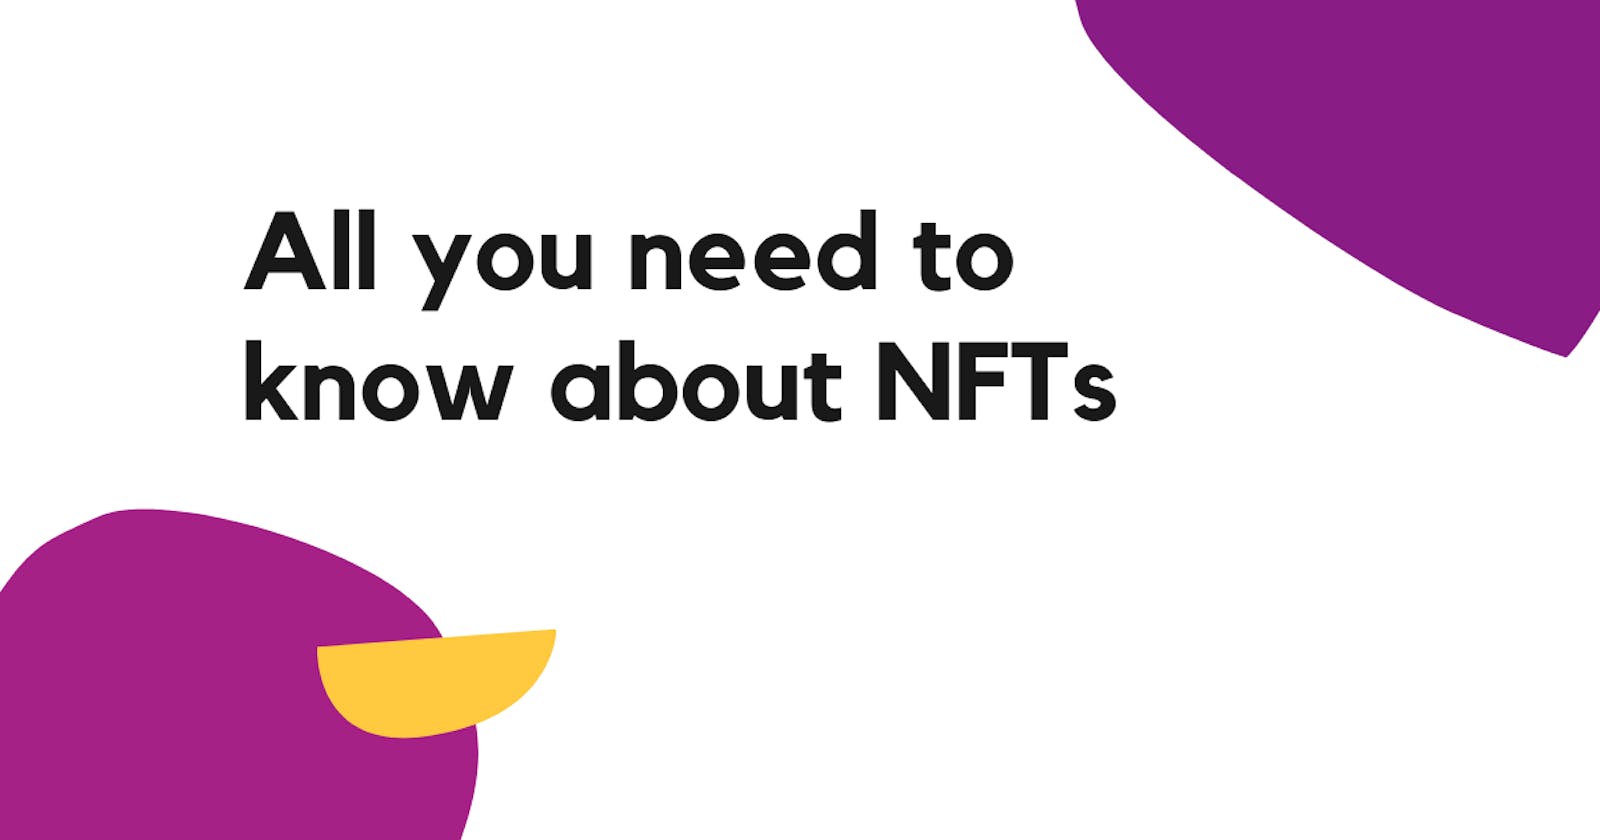 NFTs - all you need to know to sound smart on the internet